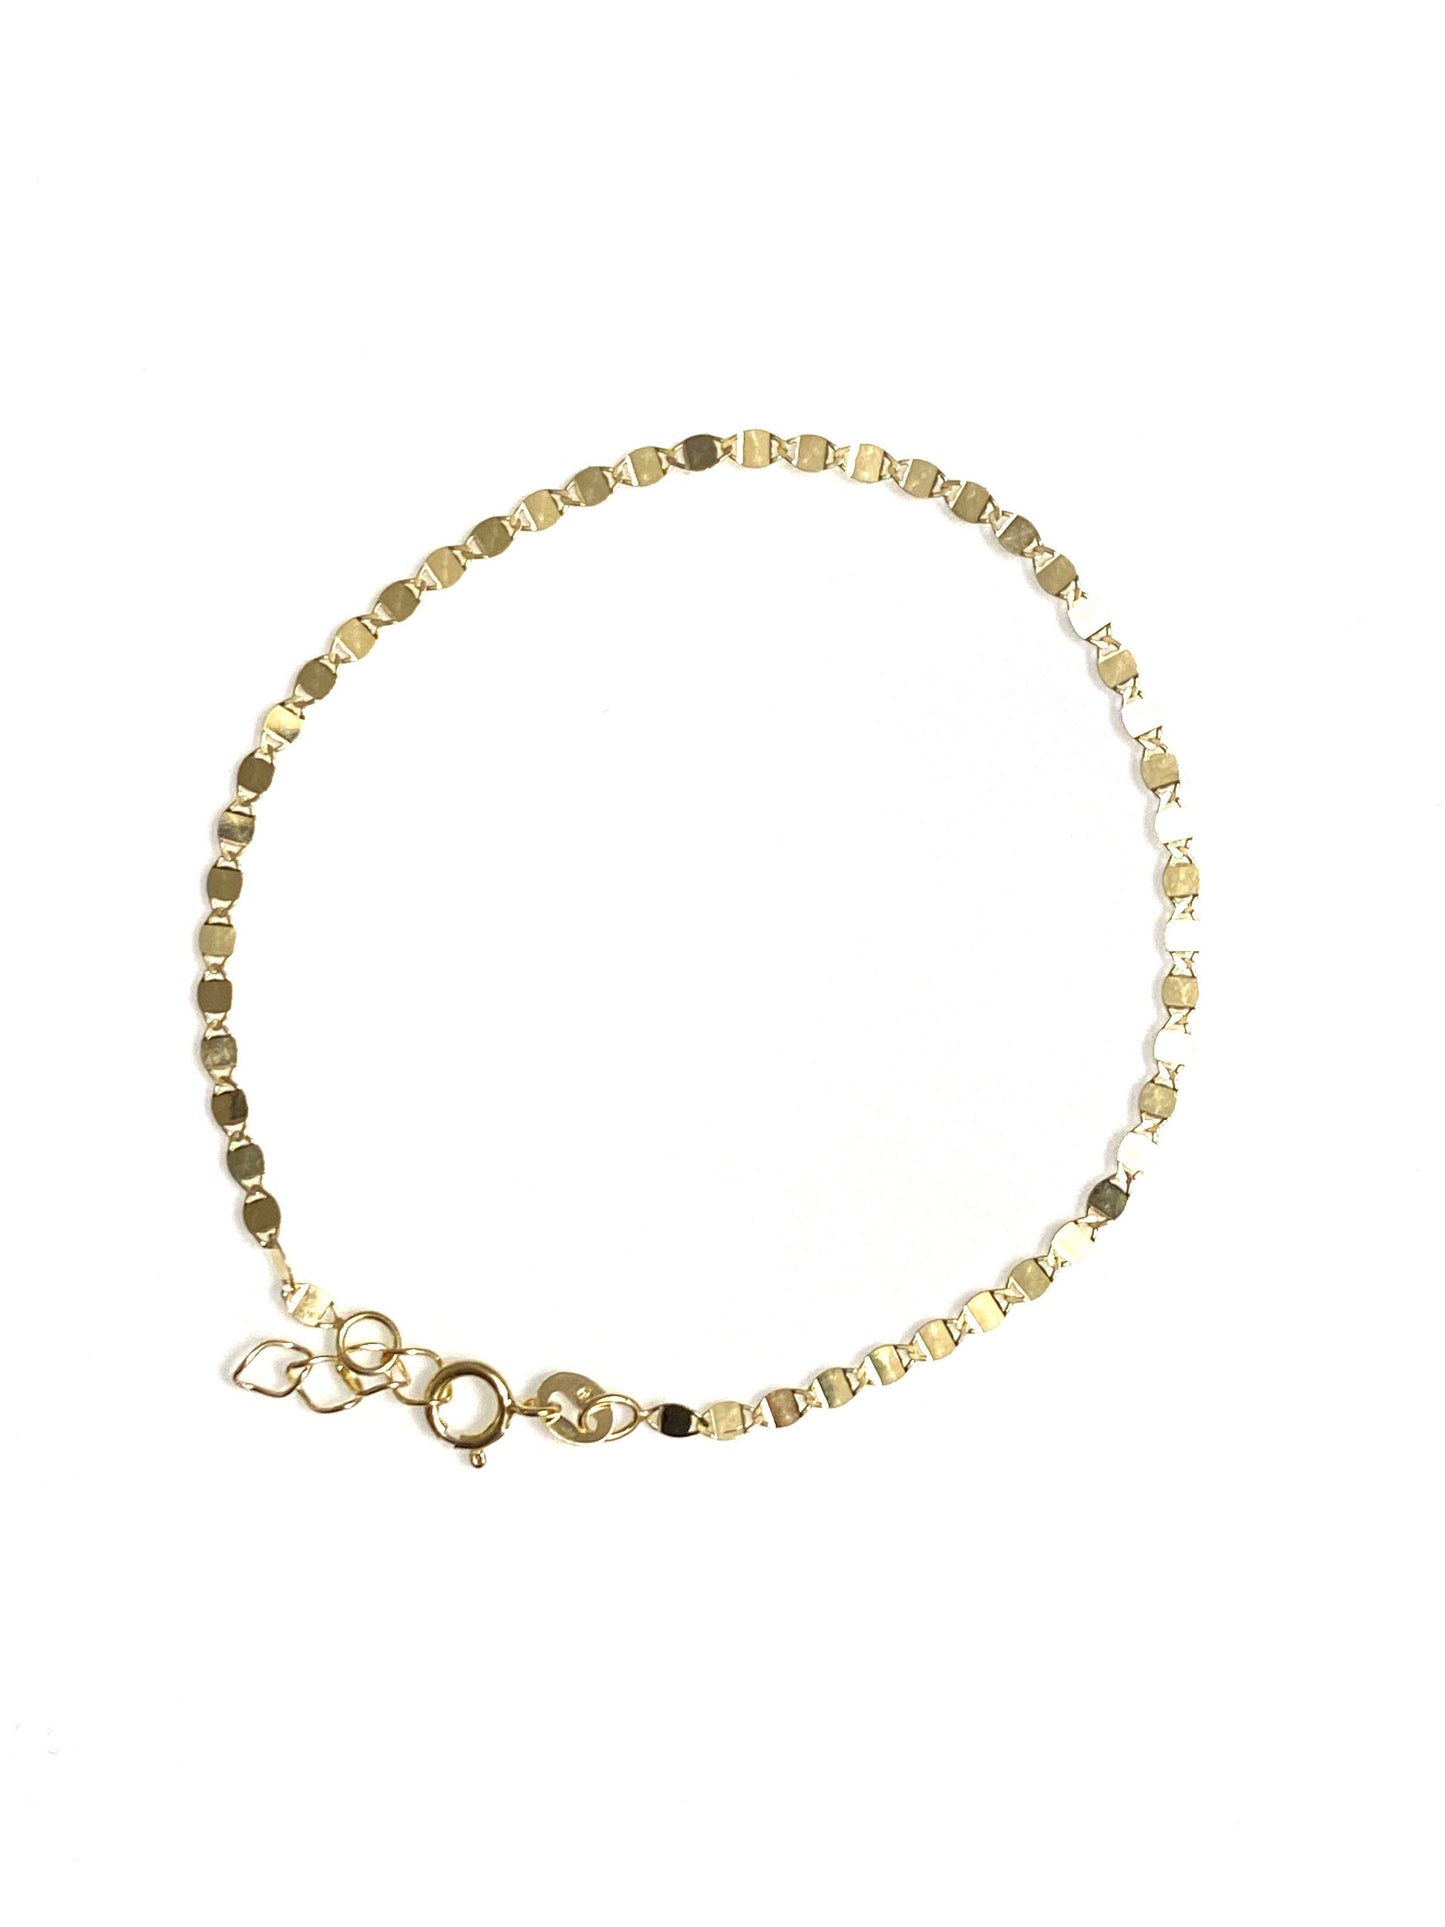 Dainty valentino chain (10K solid gold, necklace, bracelet, or anklet)